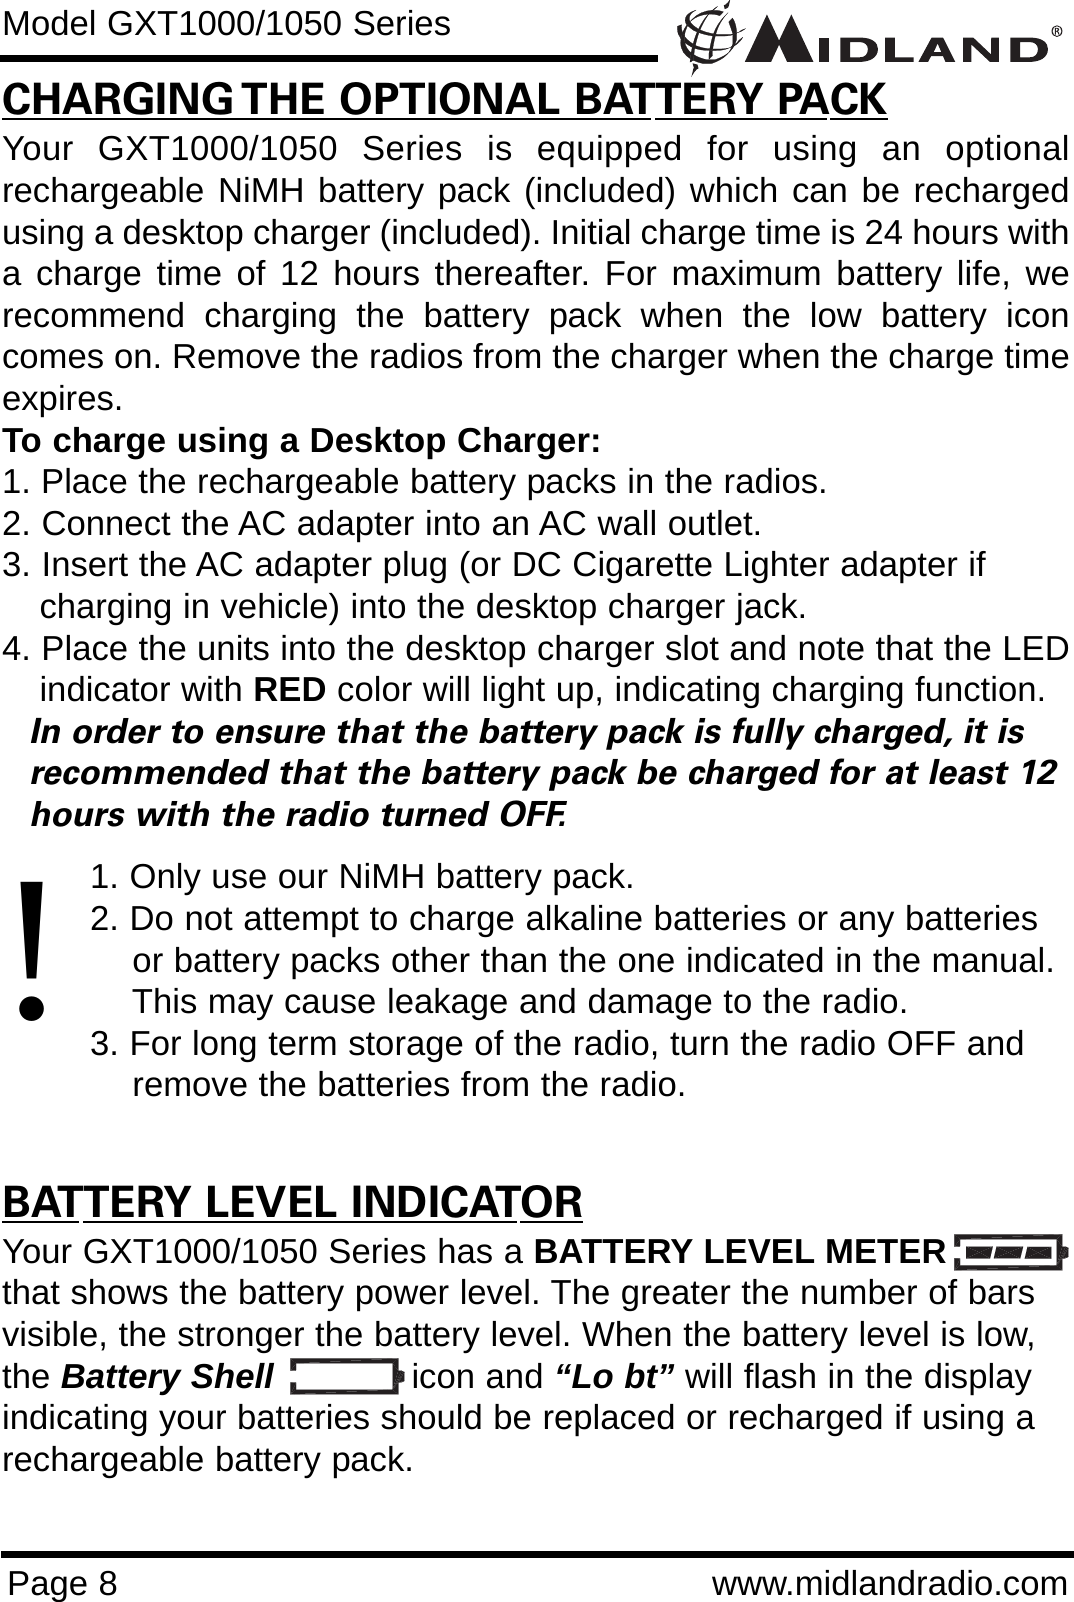 Page 8 www.midlandradio.comCHARGING THE OPTIONAL BATTERY PACKYour GXT1000/1050 Series is equipped for using an optionalrechargeable NiMH battery pack (included) which can be rechargedusing a desktop charger (included). Initial charge time is 24 hours witha charge time of 12 hours thereafter. For maximum battery life, werecommend charging the battery pack when the low battery iconcomes on. Remove the radios from the charger when the charge timeexpires.To charge using a Desktop Charger:1. Place the rechargeable battery packs in the radios.2. Connect the AC adapter into an AC wall outlet.3. Insert the AC adapter plug (or DC Cigarette Lighter adapter if    charging in vehicle) into the desktop charger jack.4. Place the units into the desktop charger slot and note that the LEDindicator with RED color will light up, indicating charging function. In order to ensure that the battery pack is fully charged, it is  recommended that the battery pack be charged for at least 12 hours with the radio turned OFF.1. Only use our NiMH battery pack.2. Do not attempt to charge alkaline batteries or any batteries or battery packs other than the one indicated in the manual. This may cause leakage and damage to the radio.3. For long term storage of the radio, turn the radio OFF and remove the batteries from the radio.BATTERY LEVEL INDICATORYour GXT1000/1050 Series has a BATTERY LEVEL METERthat shows the battery power level. The greater the number of barsvisible, the stronger the battery level. When the battery level is low,the Battery Shell icon and “Lo bt” will flash in the displayindicating your batteries should be replaced or recharged if using arechargeable battery pack.Model GXT1000/1050 Series!